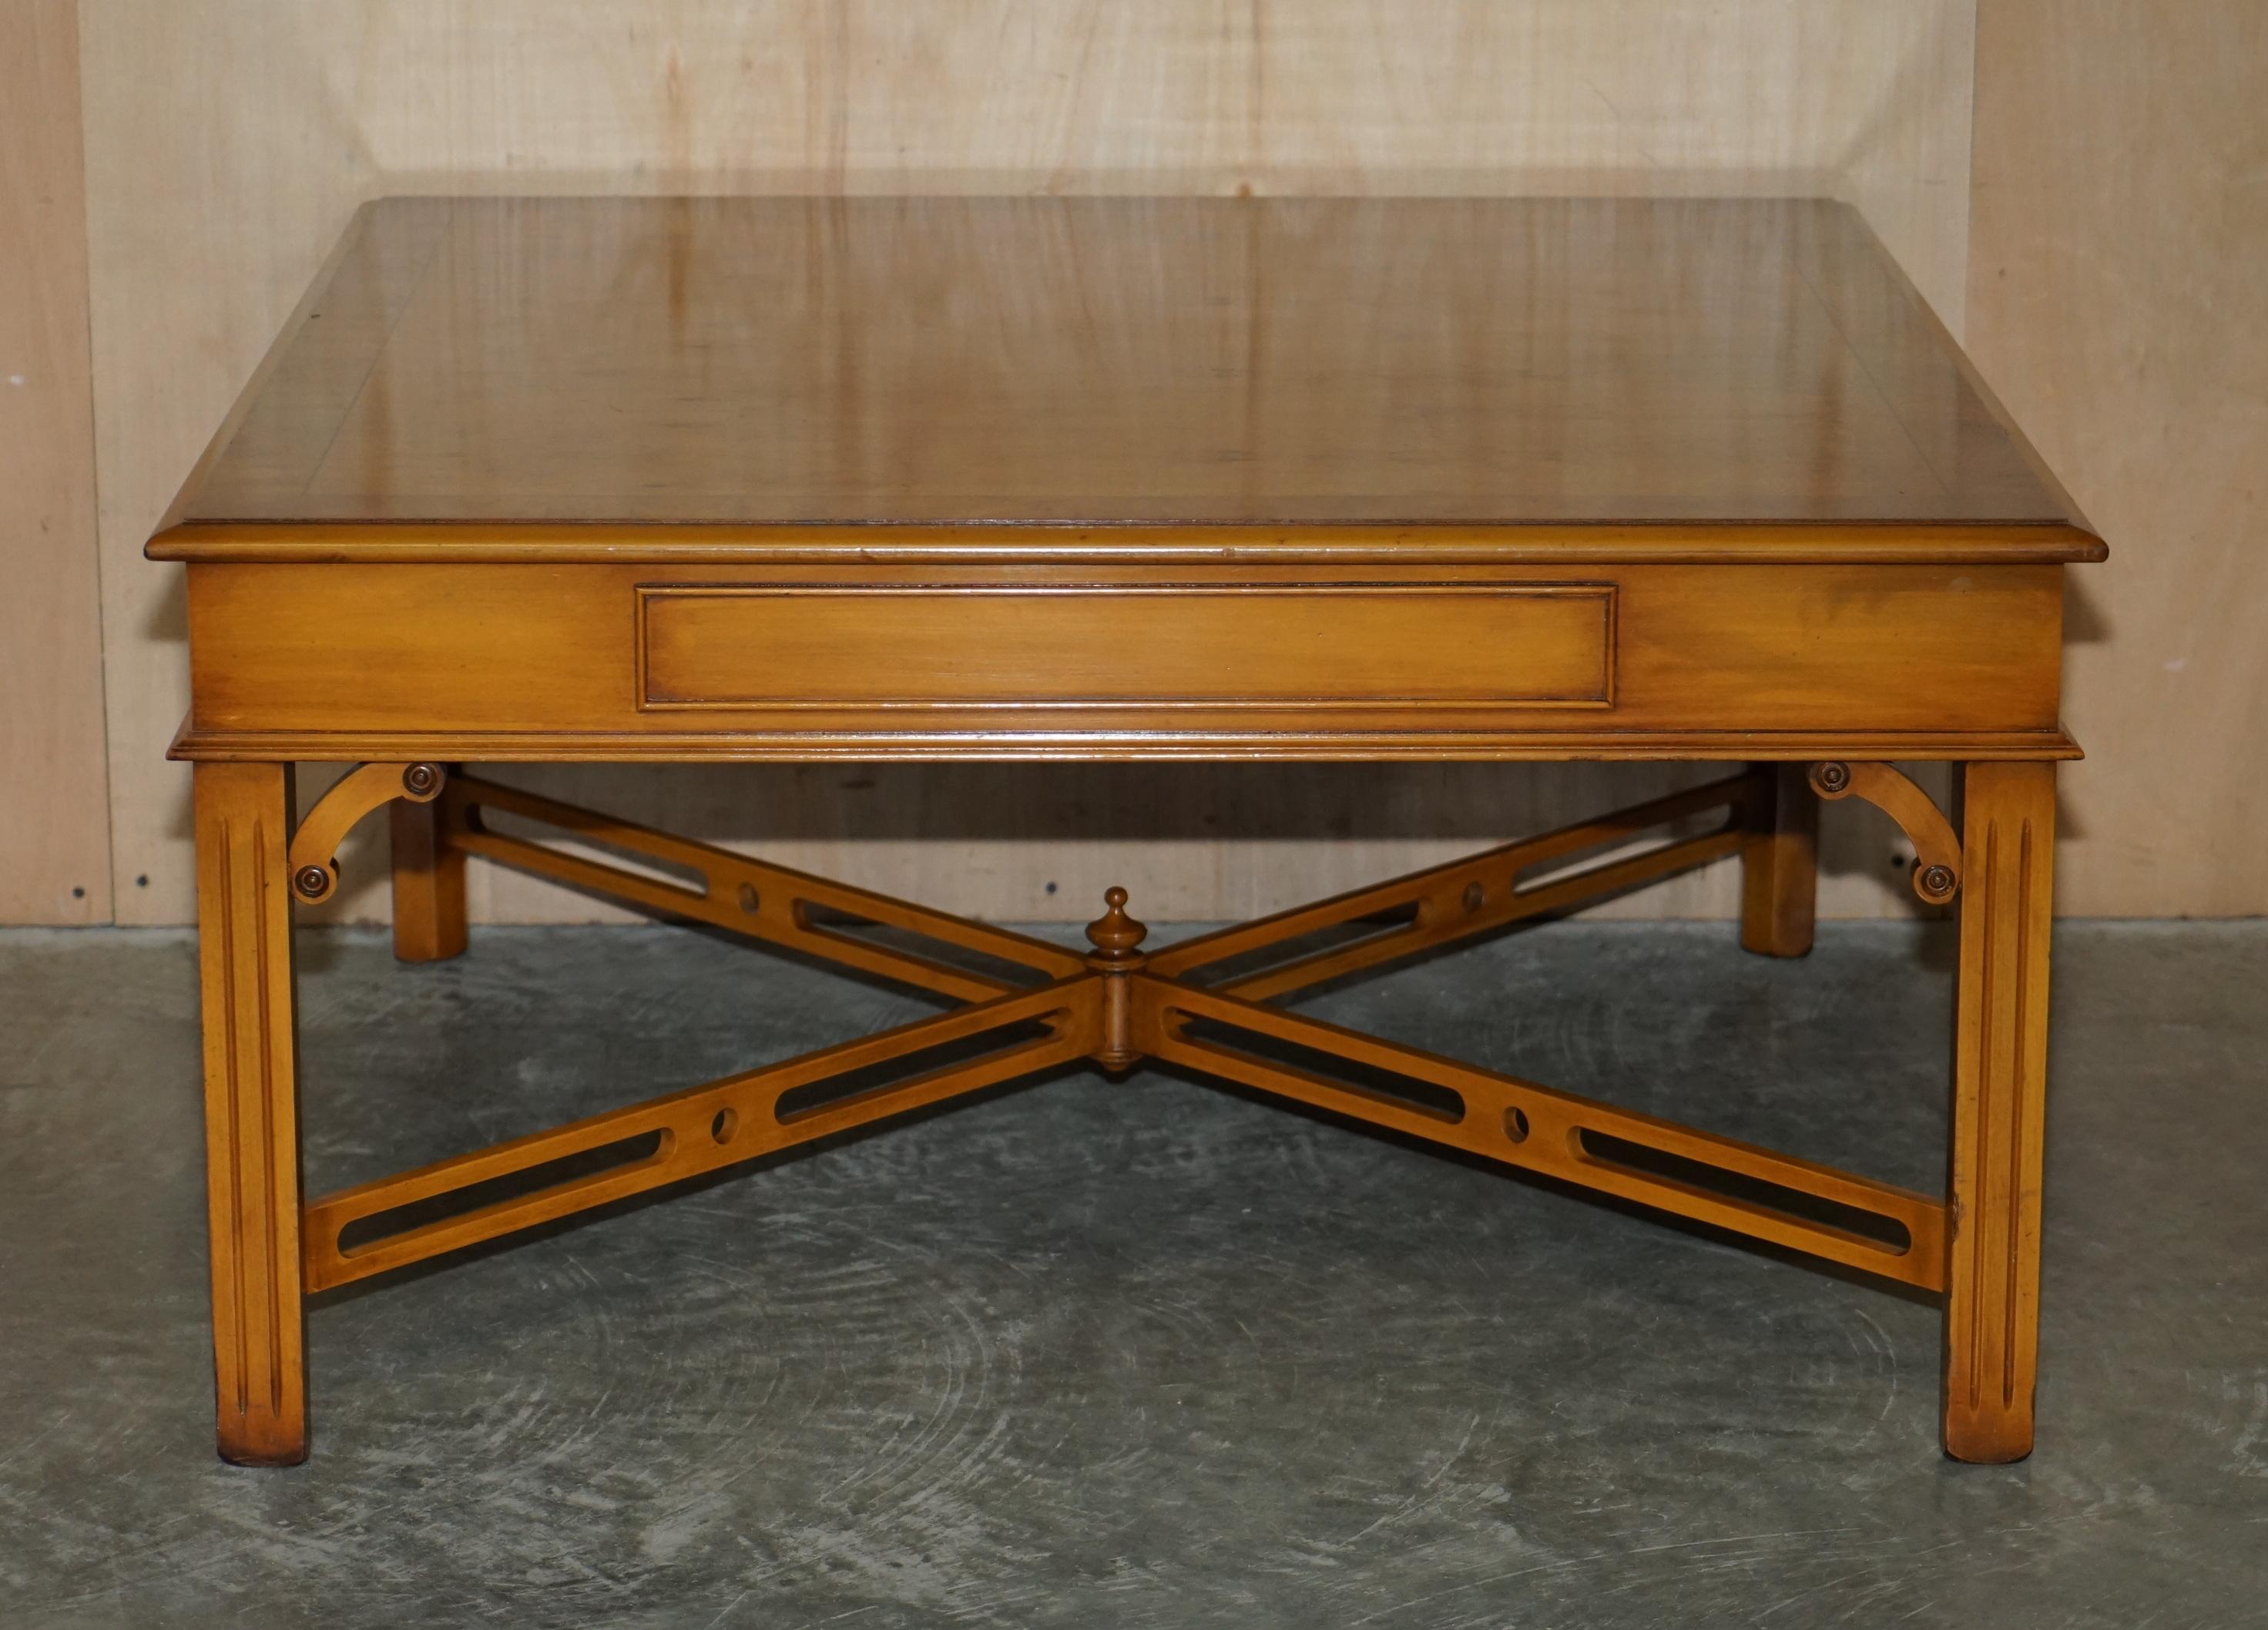 LOVELY BURR YEW WOOD TABLE COFFEE TABLE WiTH THOMAS CHIPPENDALE STRETCHES en vente 9